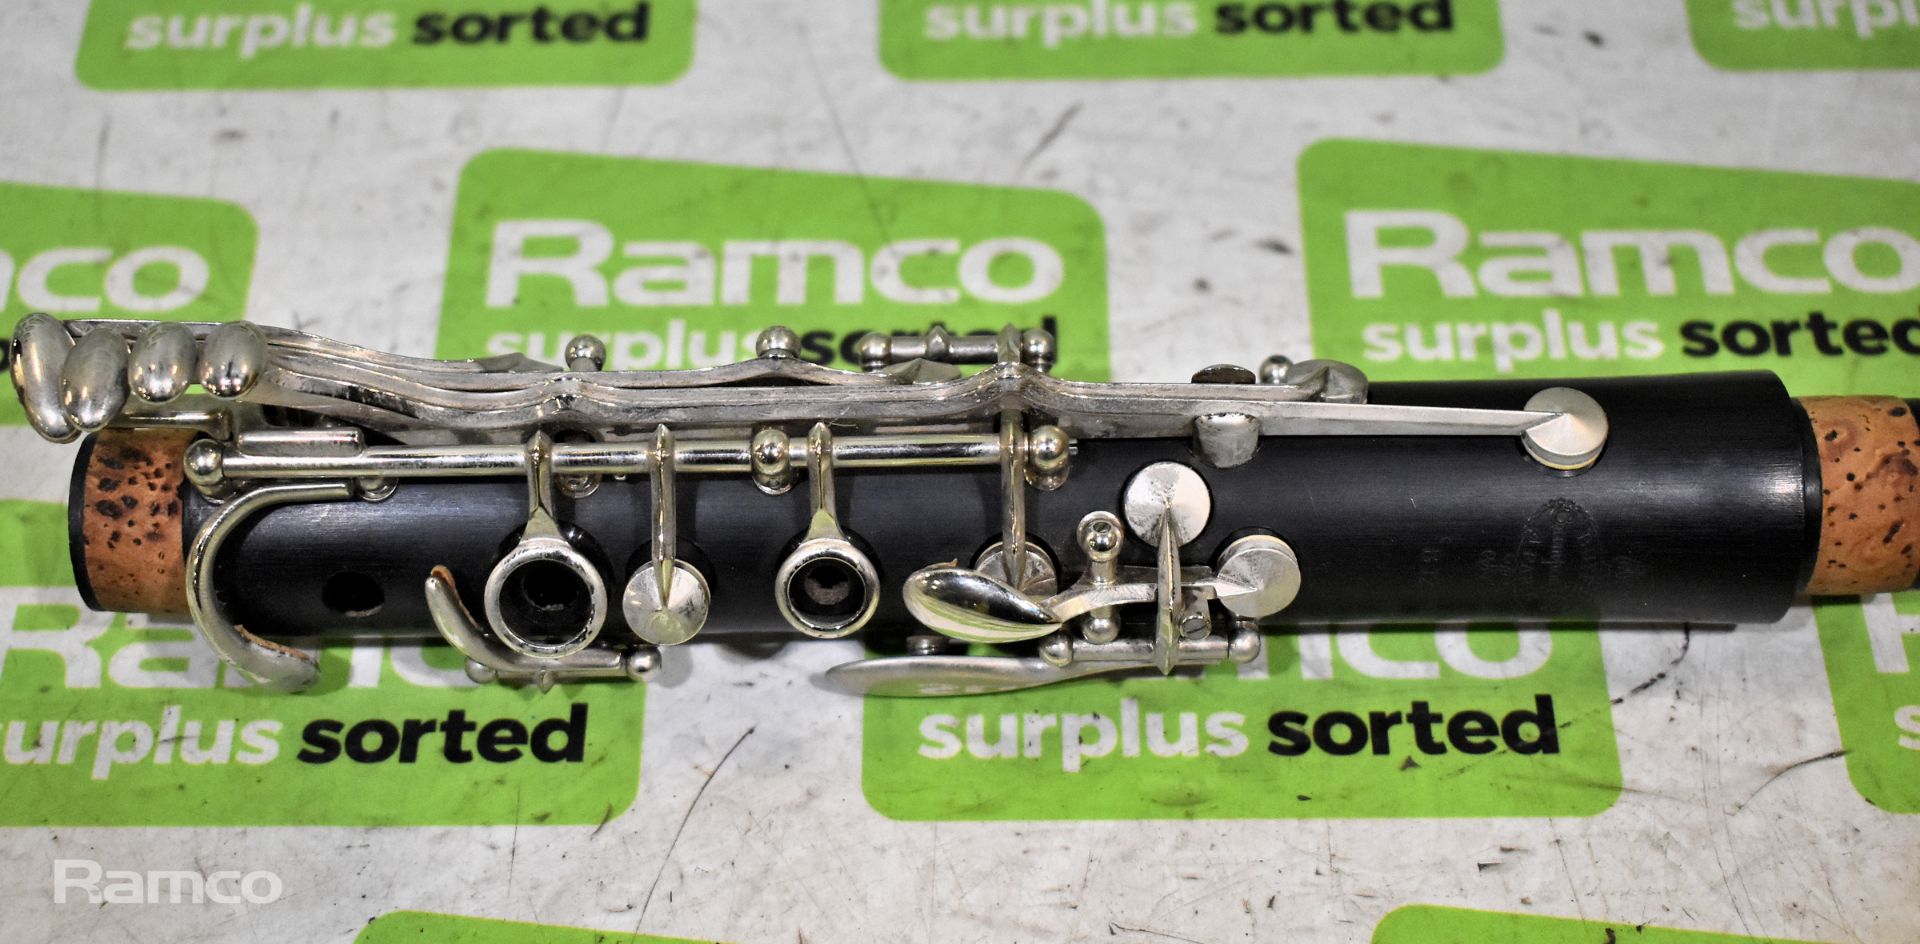 Buffet Crampon B12 clarinet - serial No 516793 - with case - Image 7 of 13